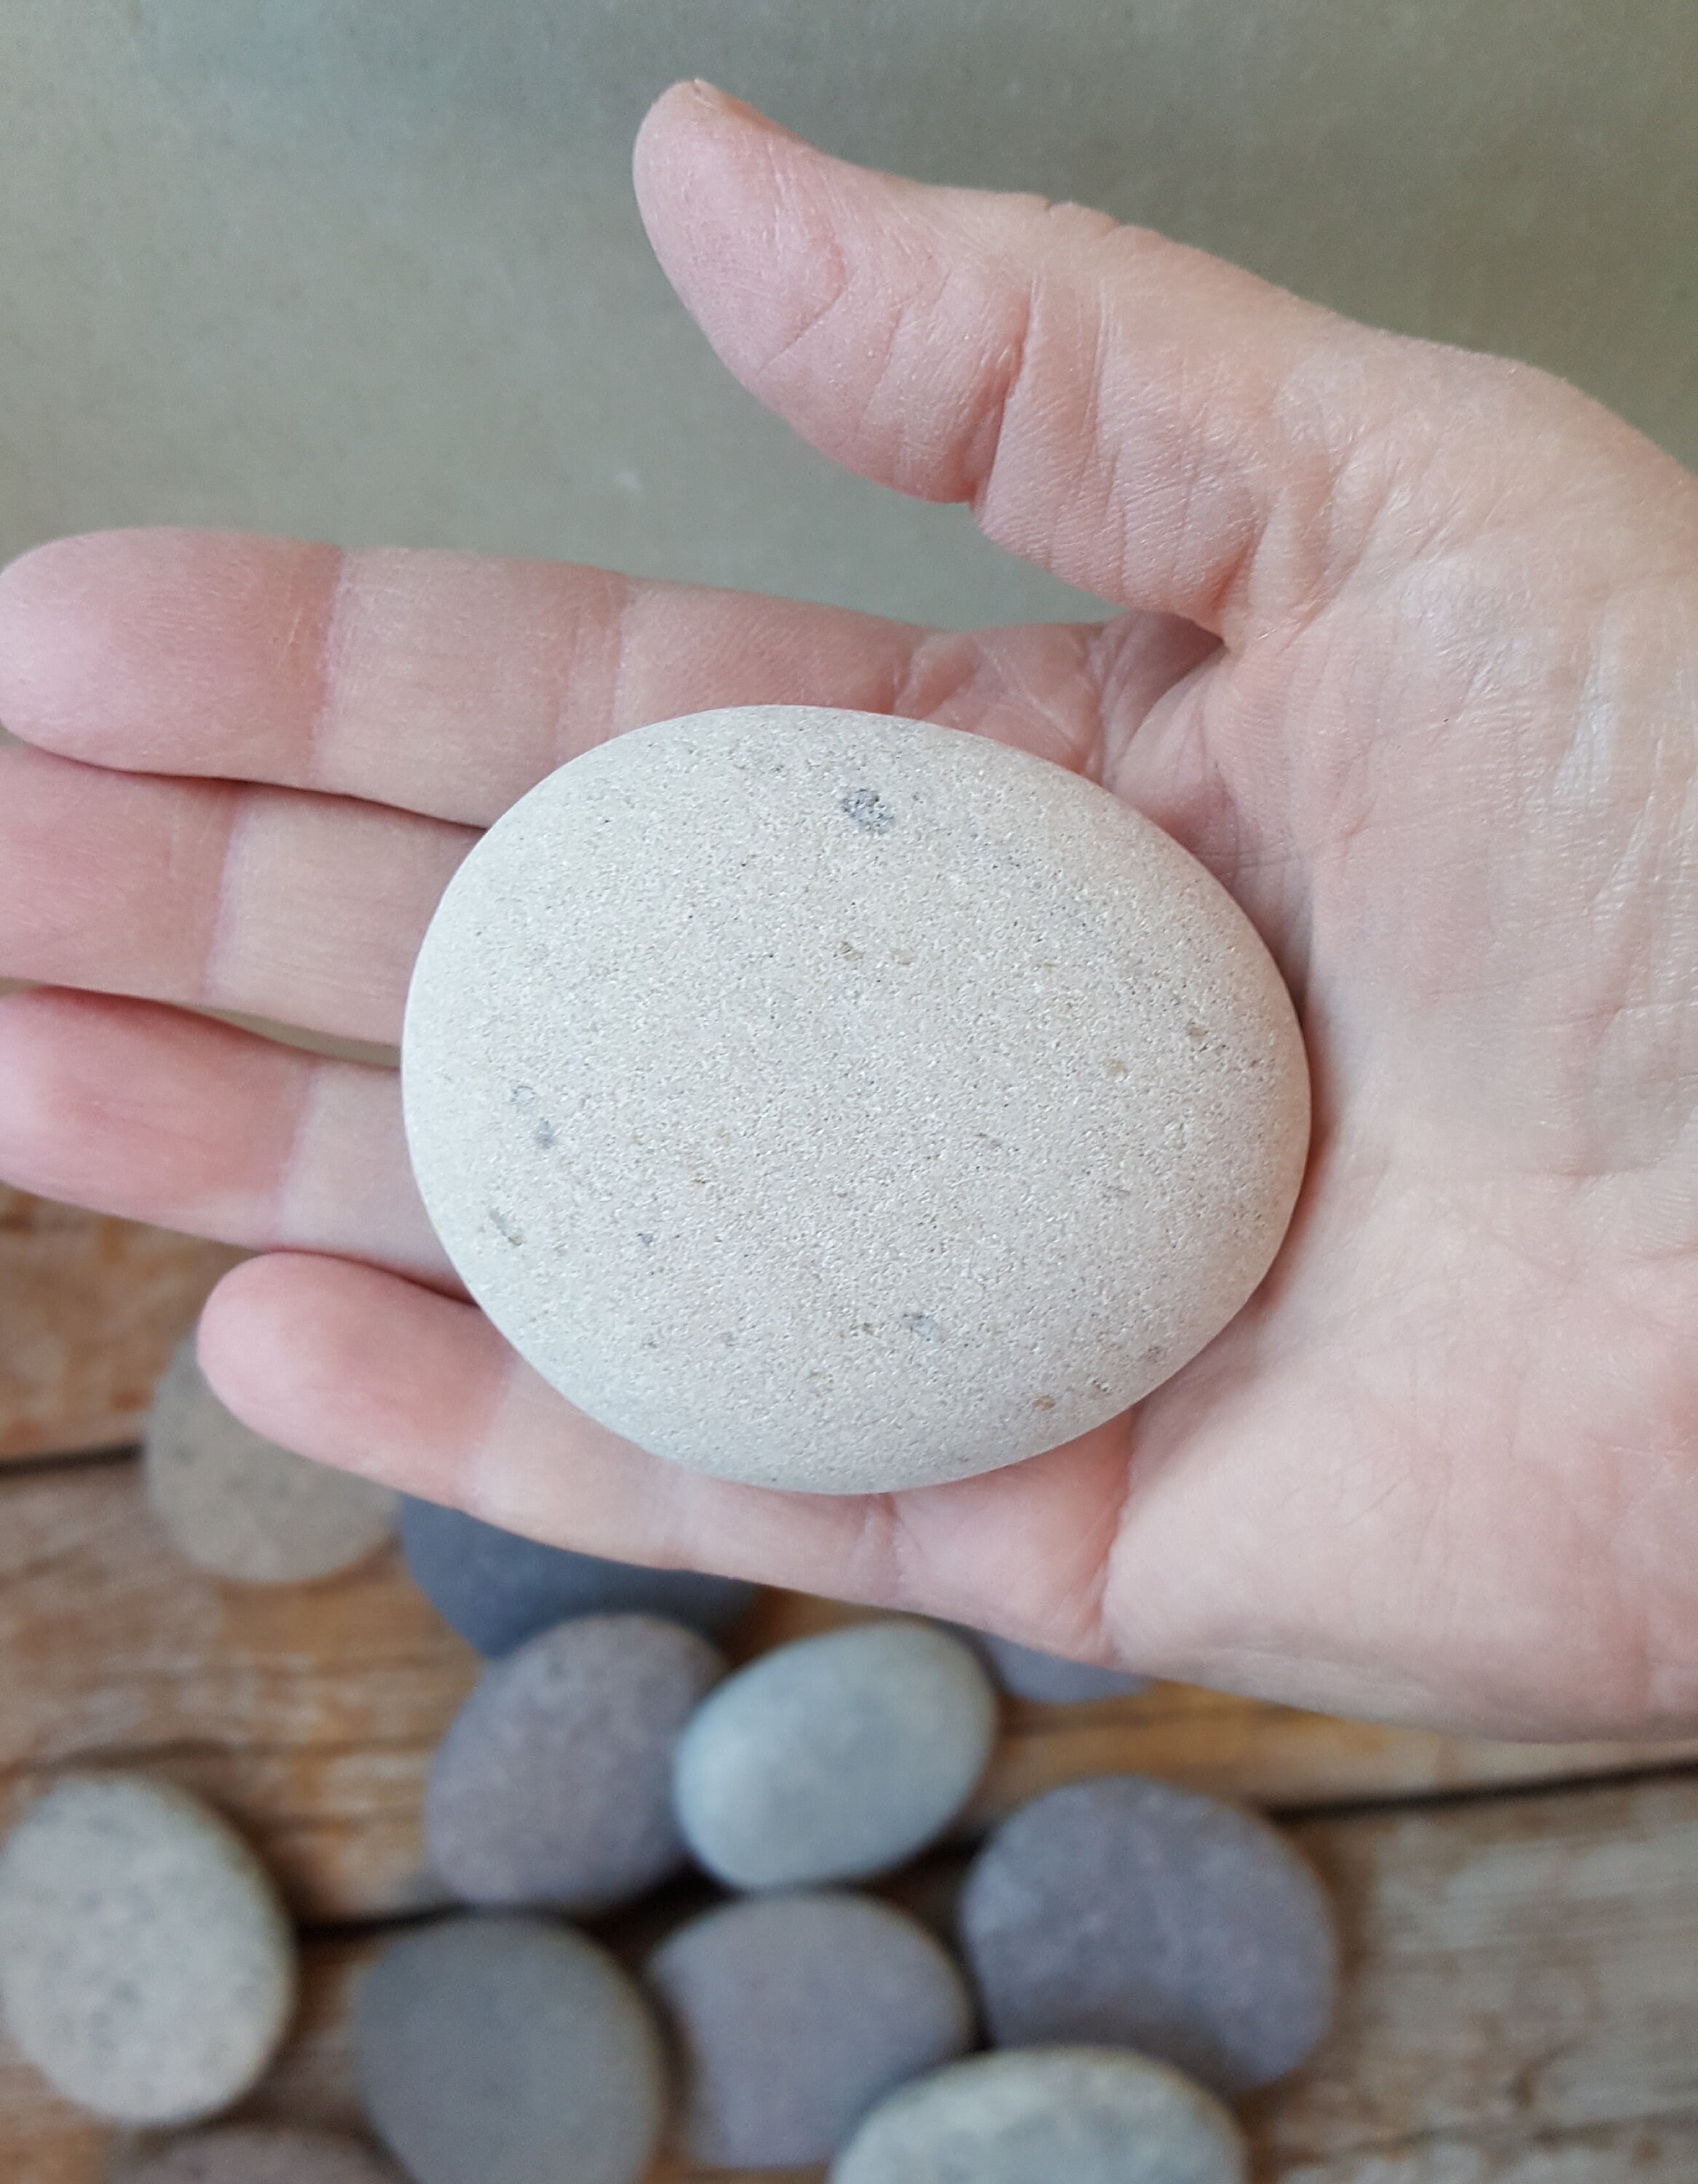 2.362.75large Sea Stones stones for Painting beach Stones mandala Stones-stones  for Crafts Mandala Rocks Large Rocks for Painting 